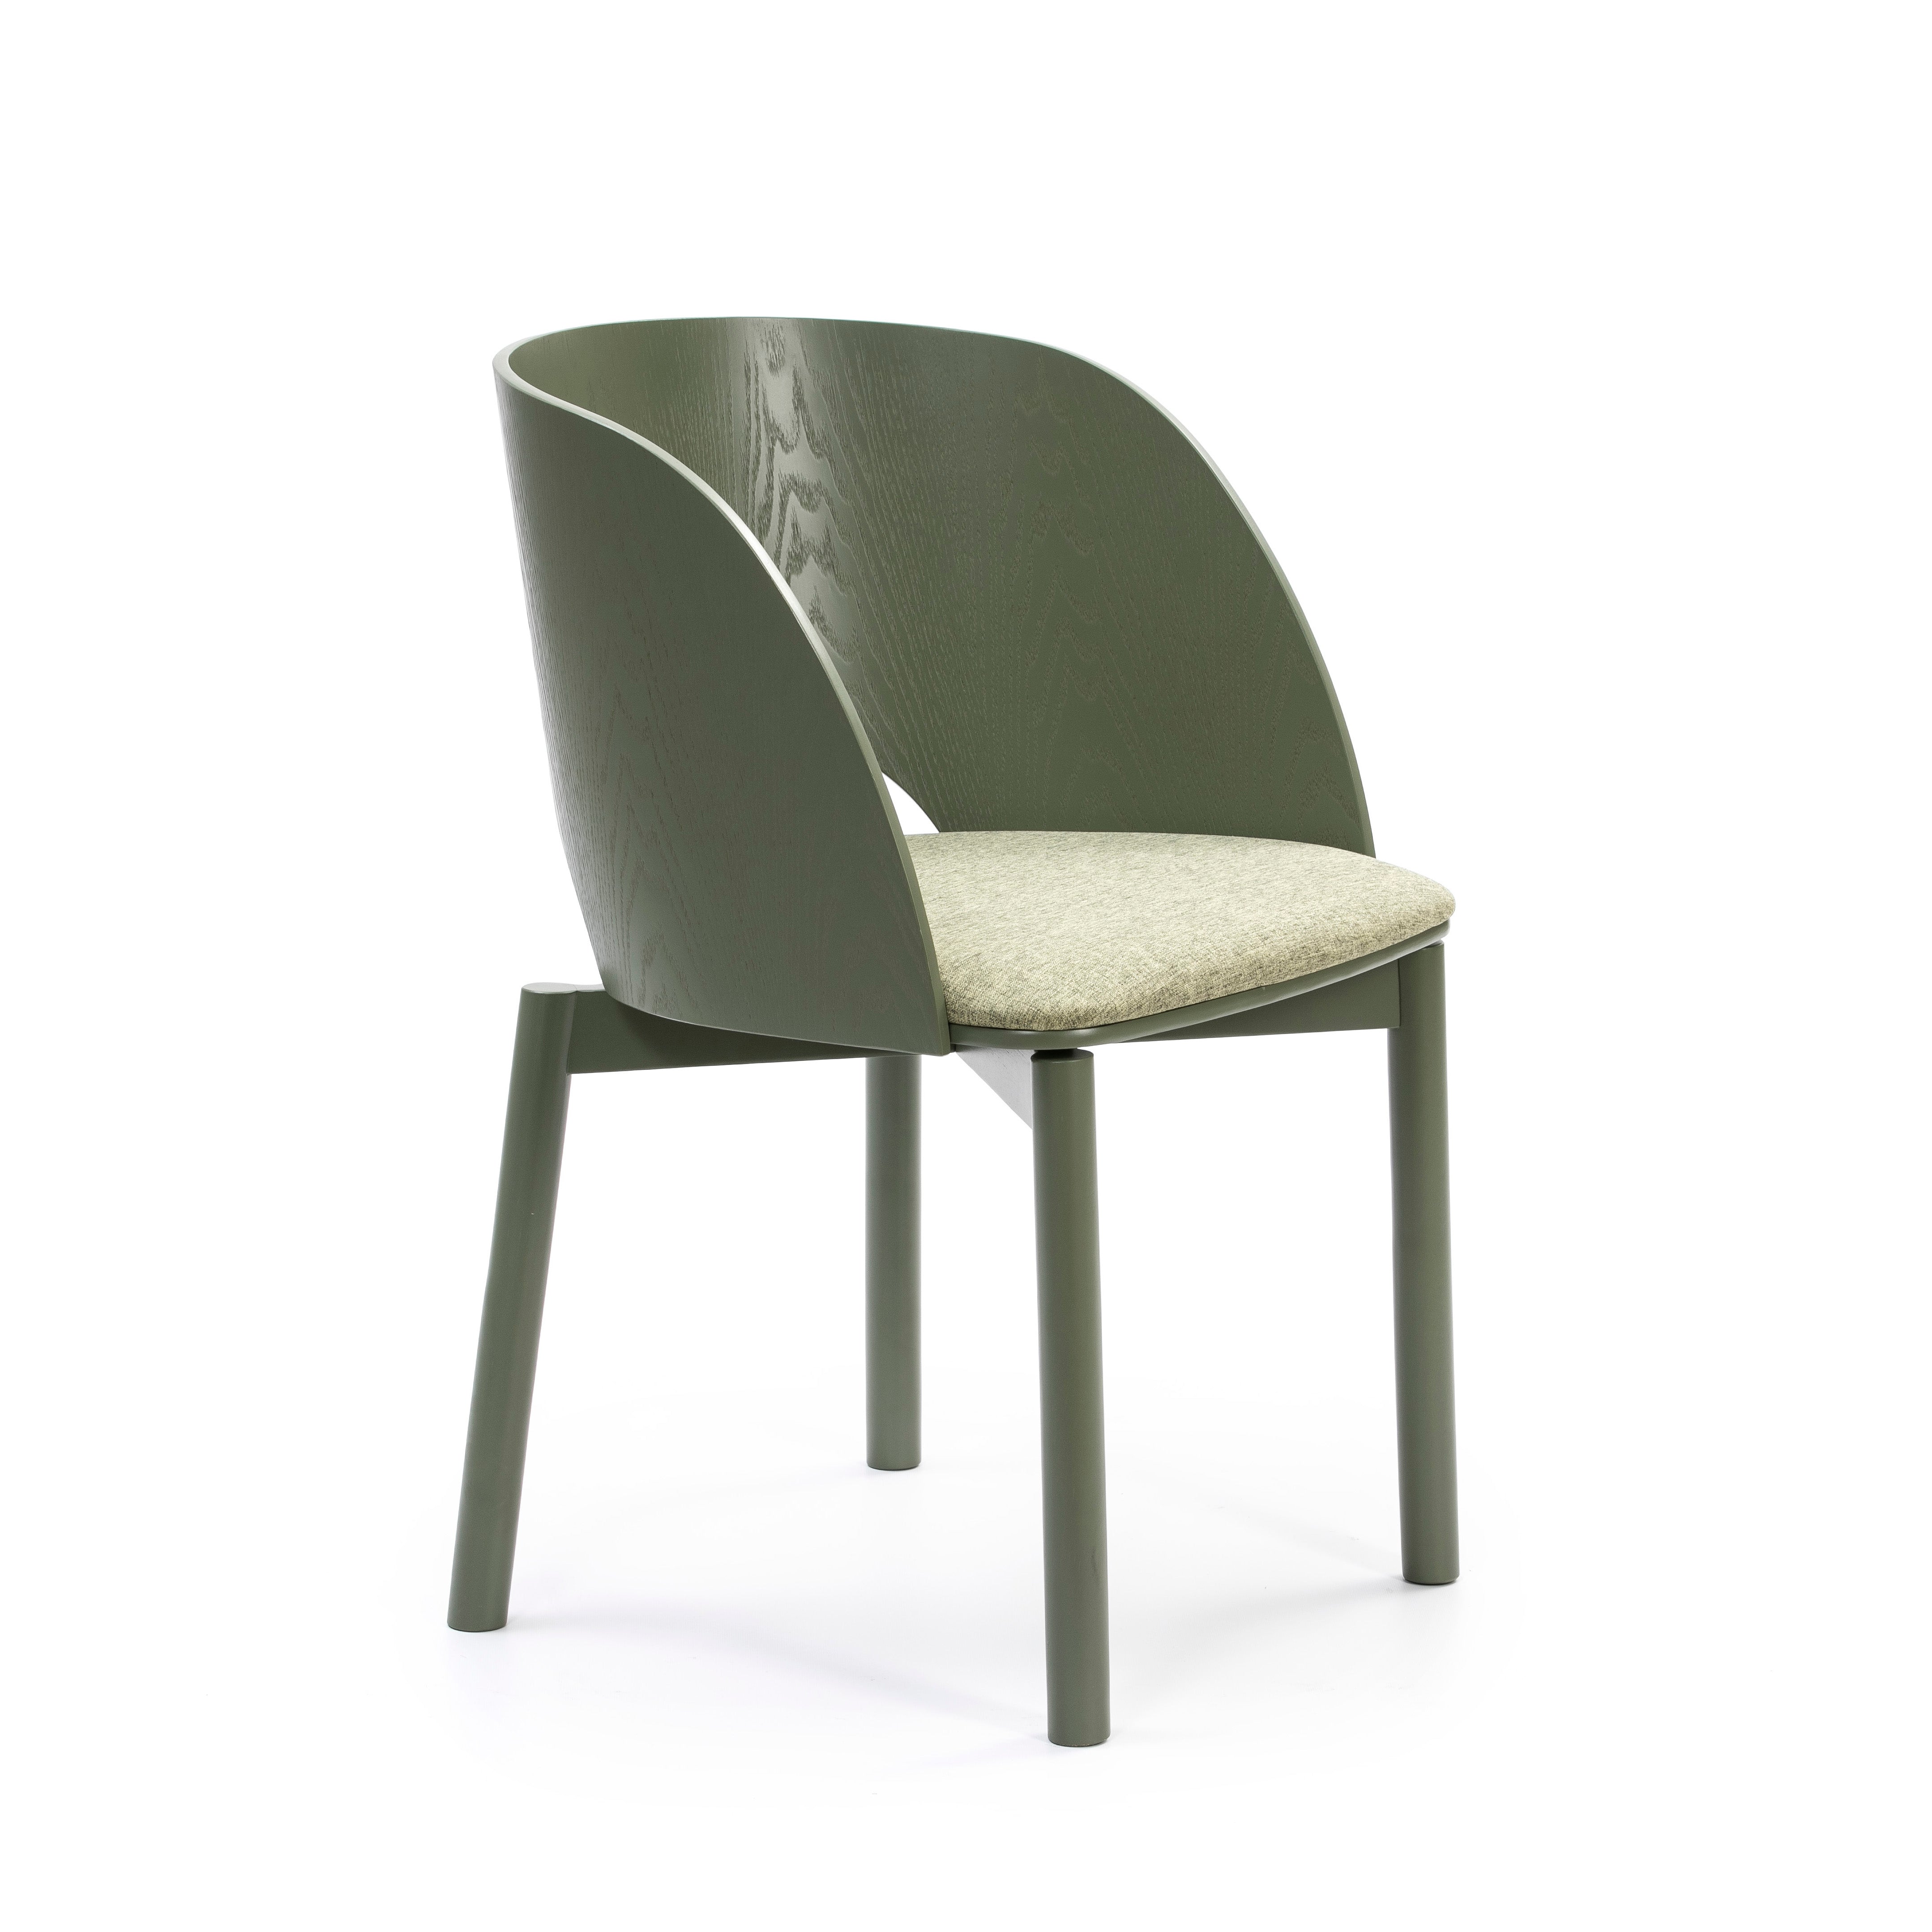 DAM chair olive